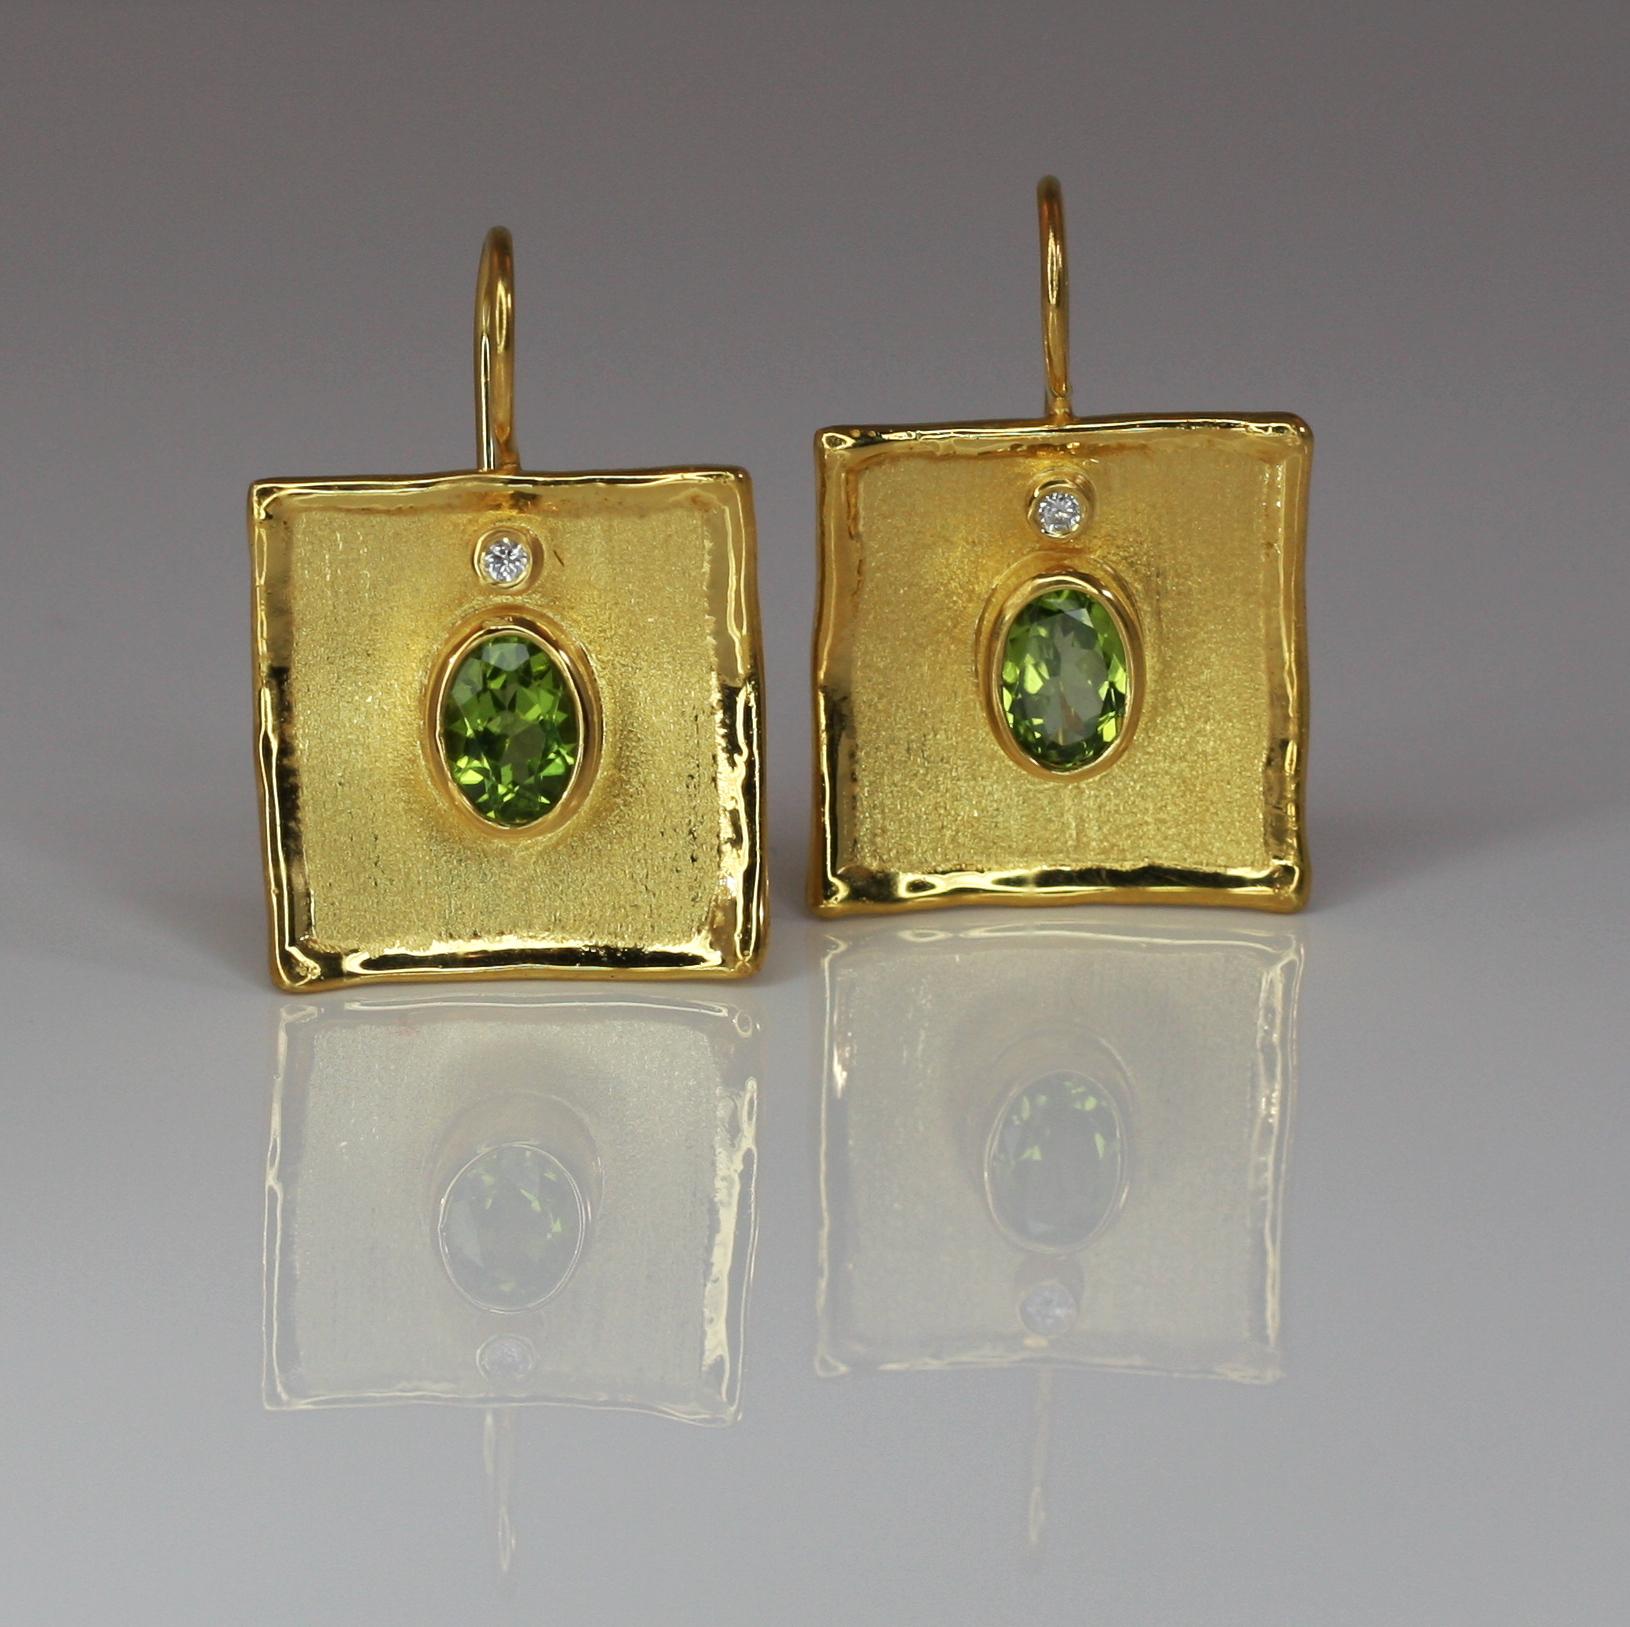 Got in love with Yianni Creations 100% Handmade Artisan Earrings crafted from 18 Karat Yellow Gold using unique techniques of craftsmanship - brushed texture and nature-inspired liquid edges. Each earring is decorated with 1.35 Carat Oval Cut